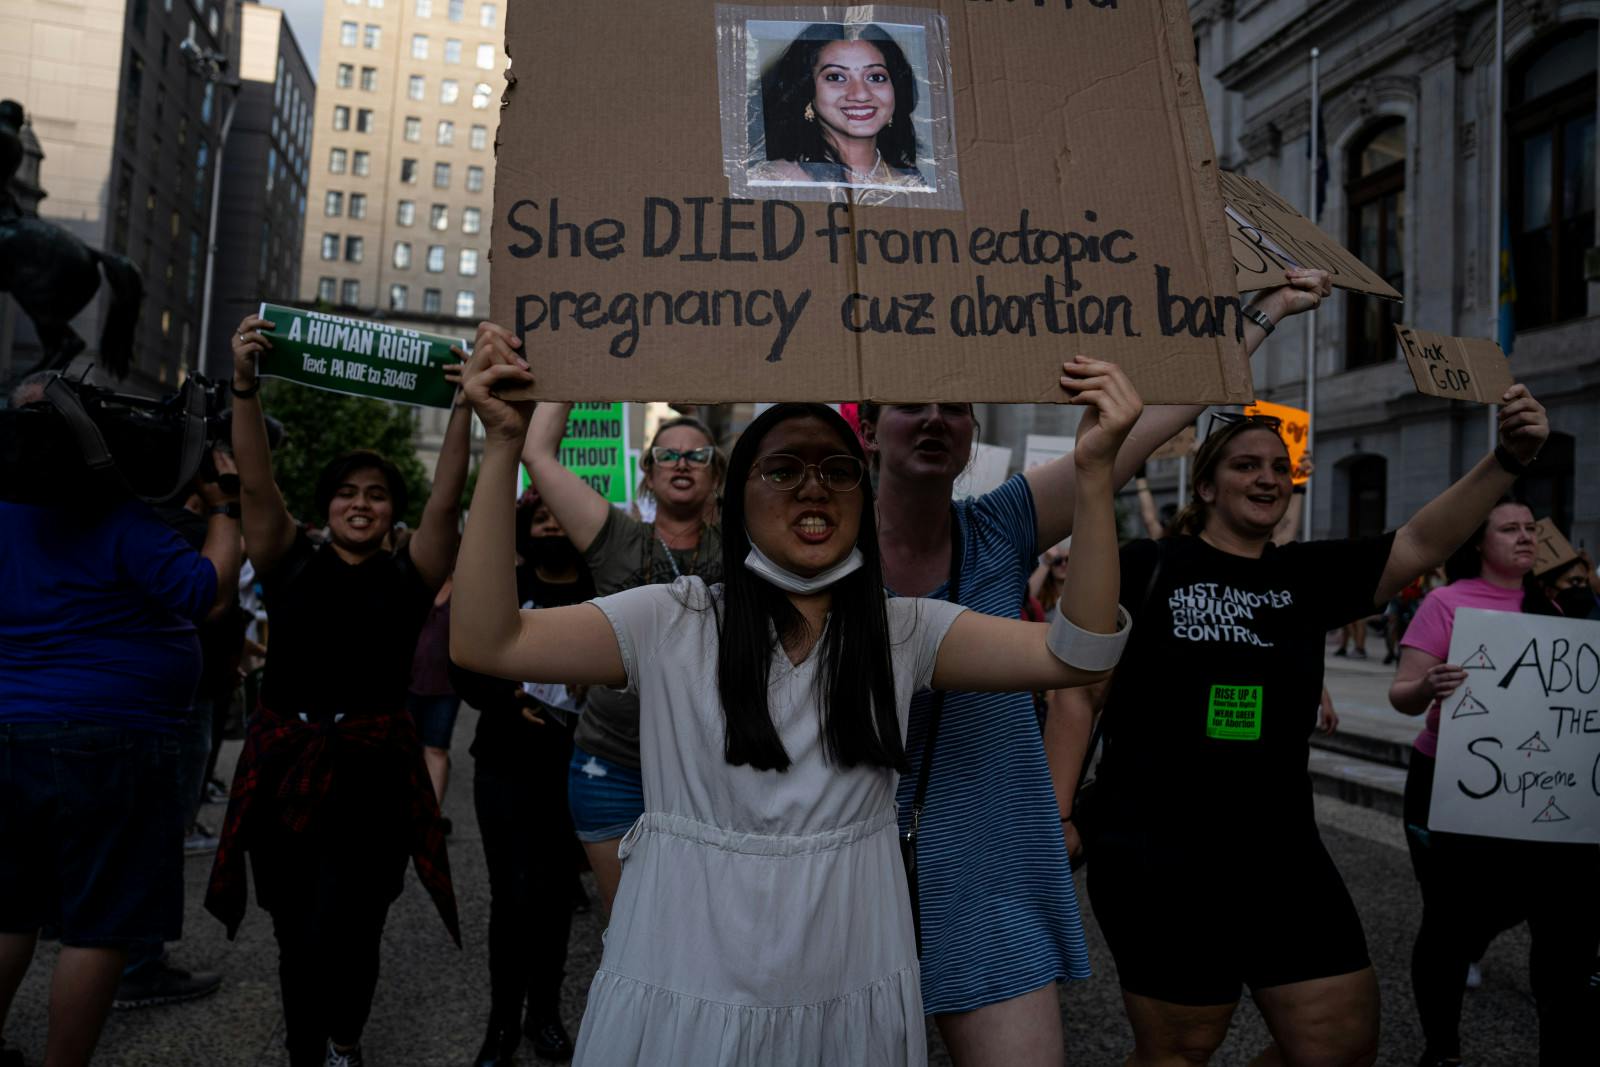 PHILADELPHIA, JUNE 24: Demonstrators gather outside of City Hall to protest the Supreme Court's verdict to overturn Roe vs Wade. Protester is holding up a sign for Savita Halappanavar, who died in Ireland due to not being able to access an abortion. (Wolfgang Schwan/Anadolu Agency via Getty Images)